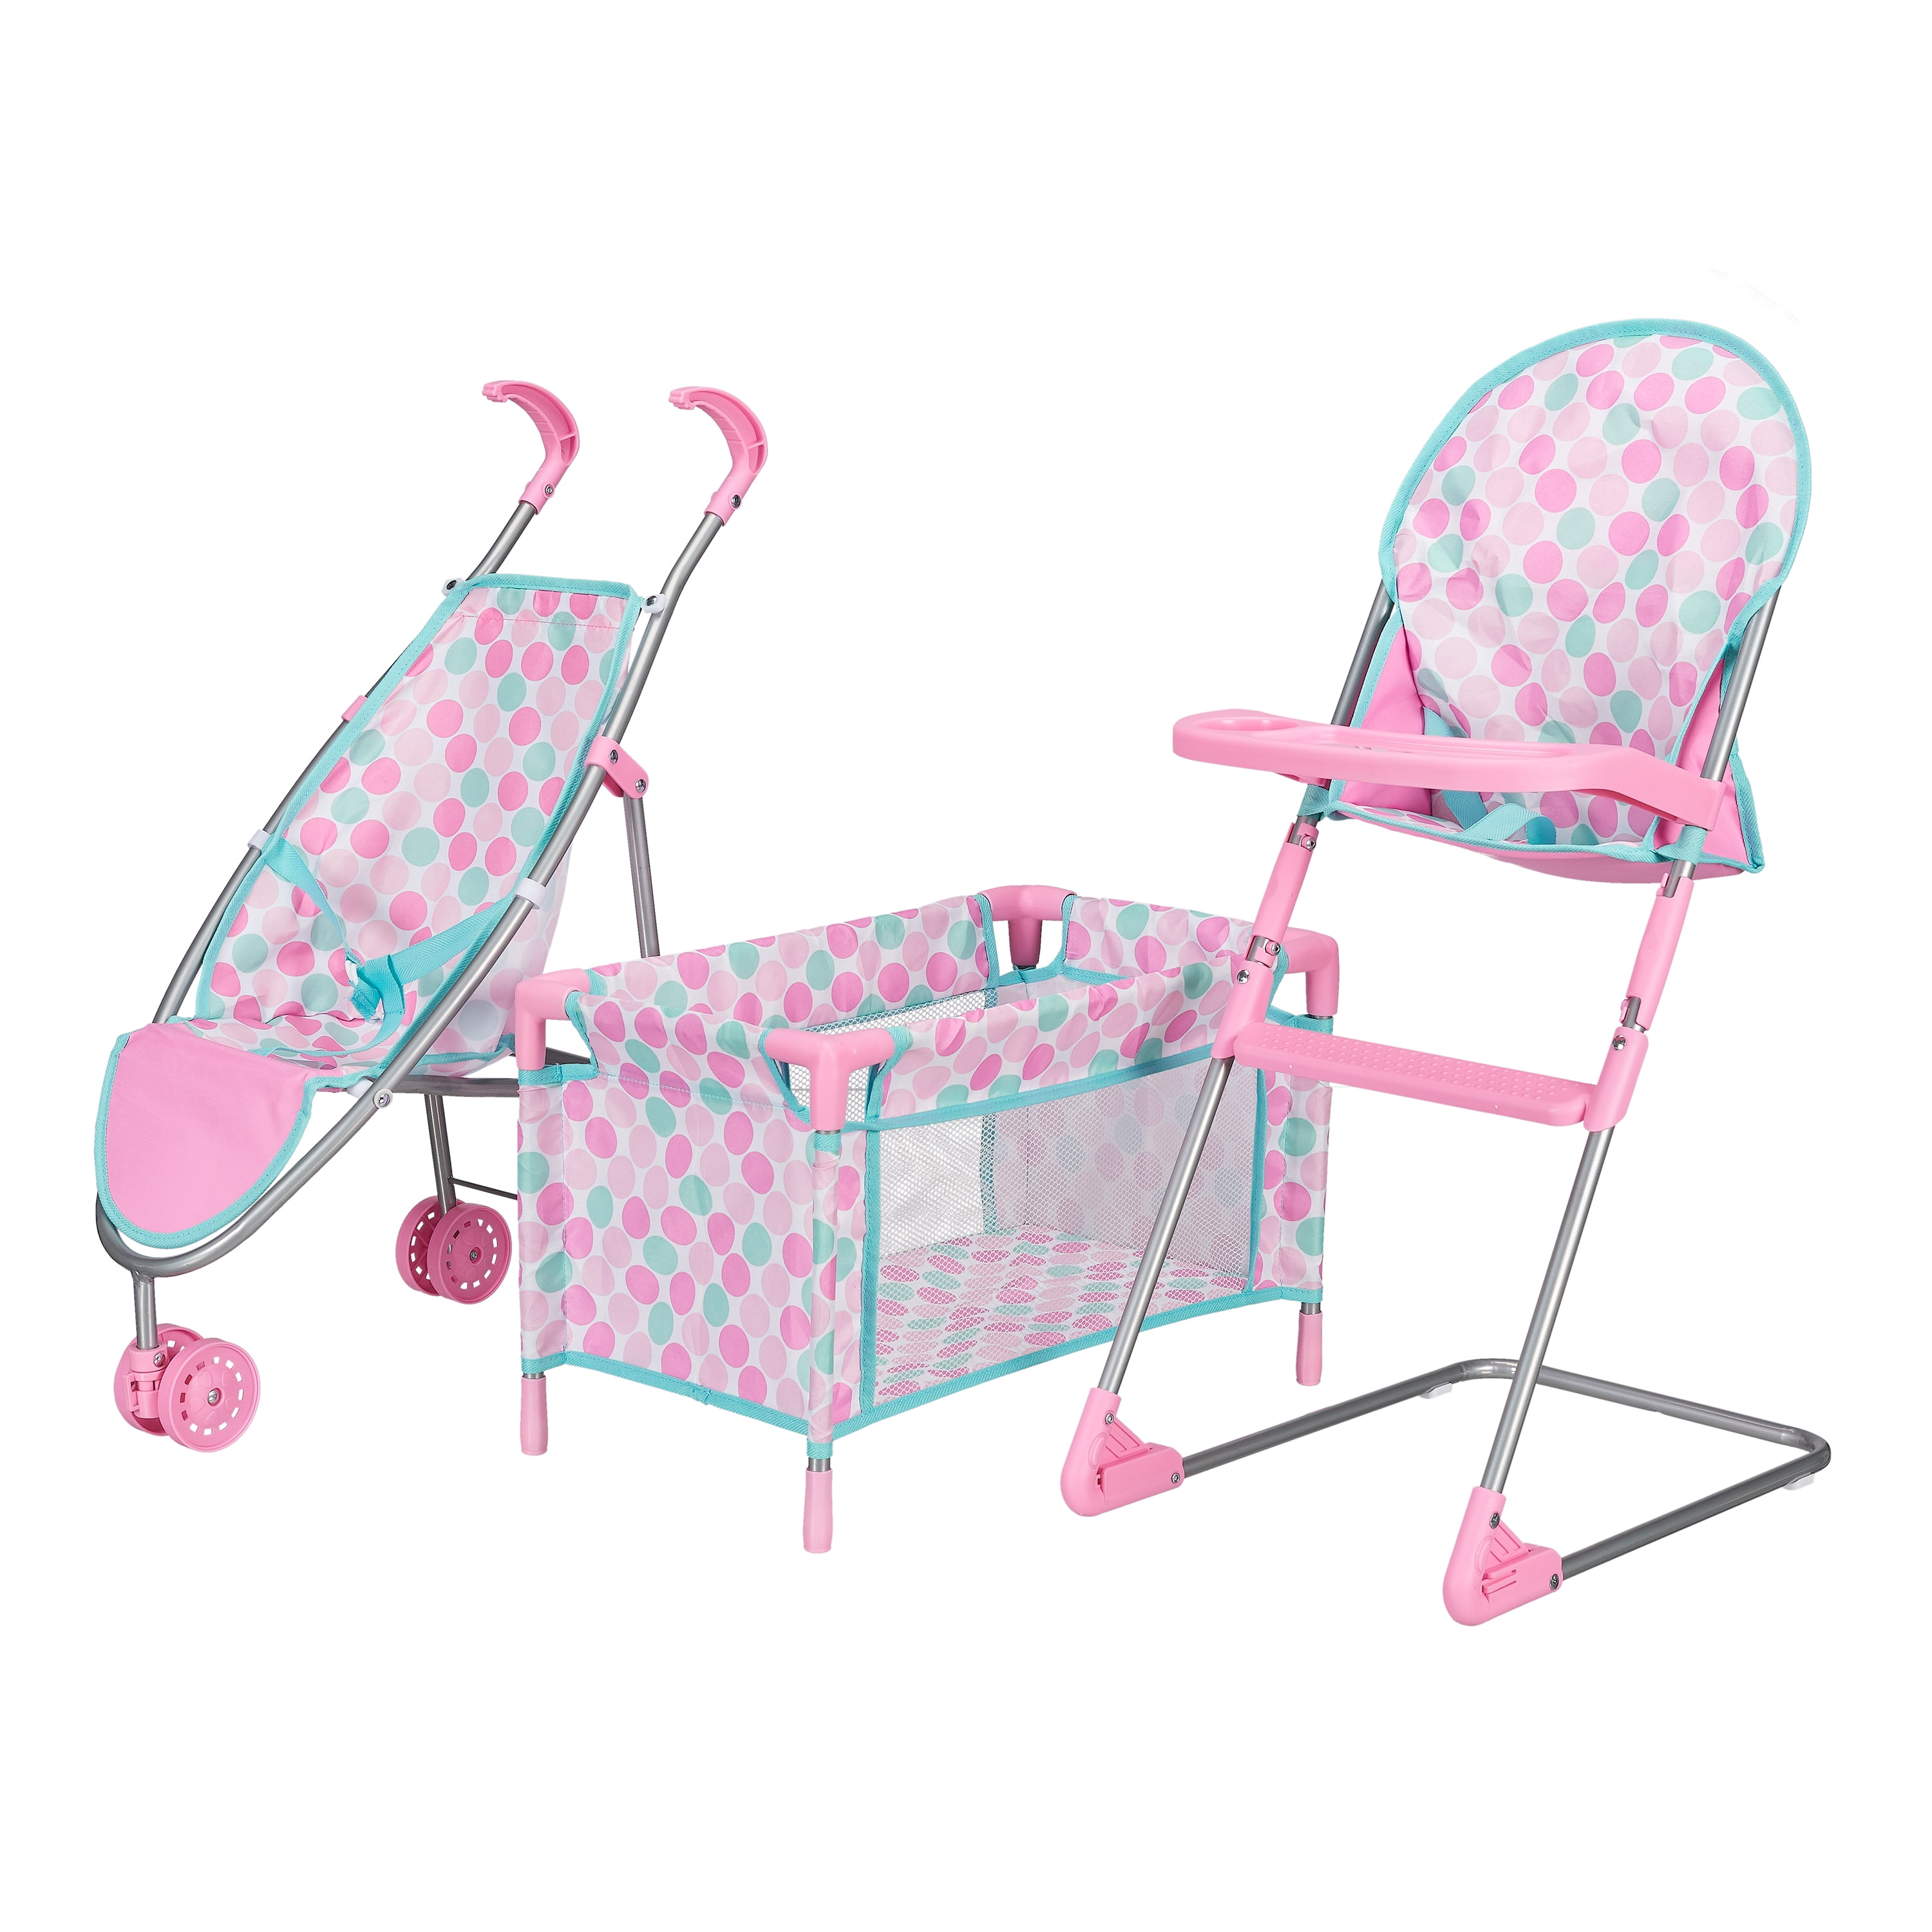 Lovely Doll Swing Furniture Playset Kids Pretend Play Toy Accessory Pink 